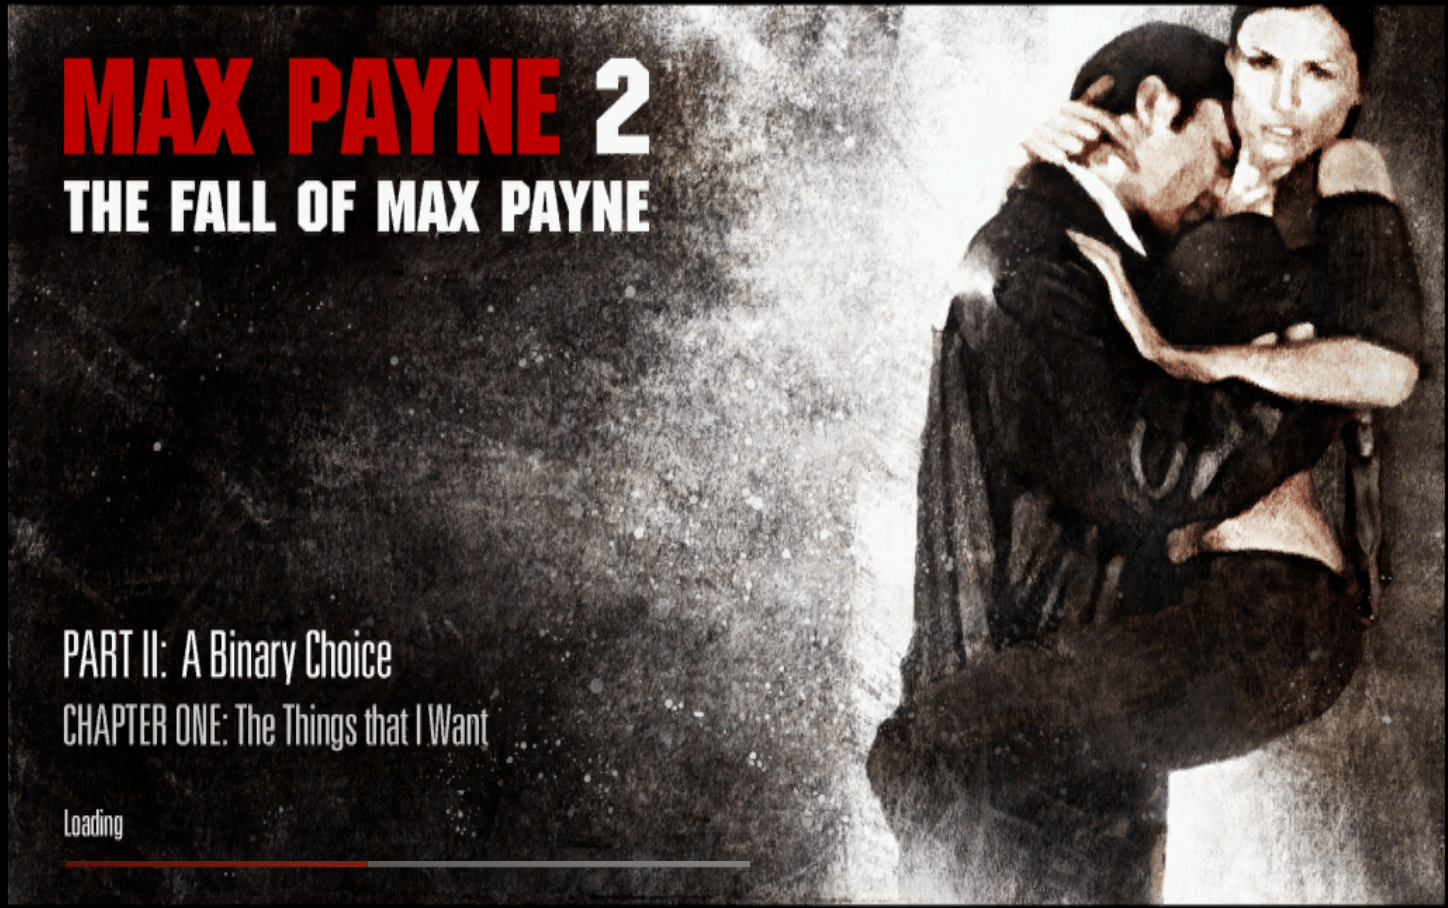 If You Played Max Payne 3 Before, How Was Your Experience? Personally, I  Really Loved It. Tho, I'd Say Max Payne 2 Is Probably My Fav Out Of The  Trilogy But I